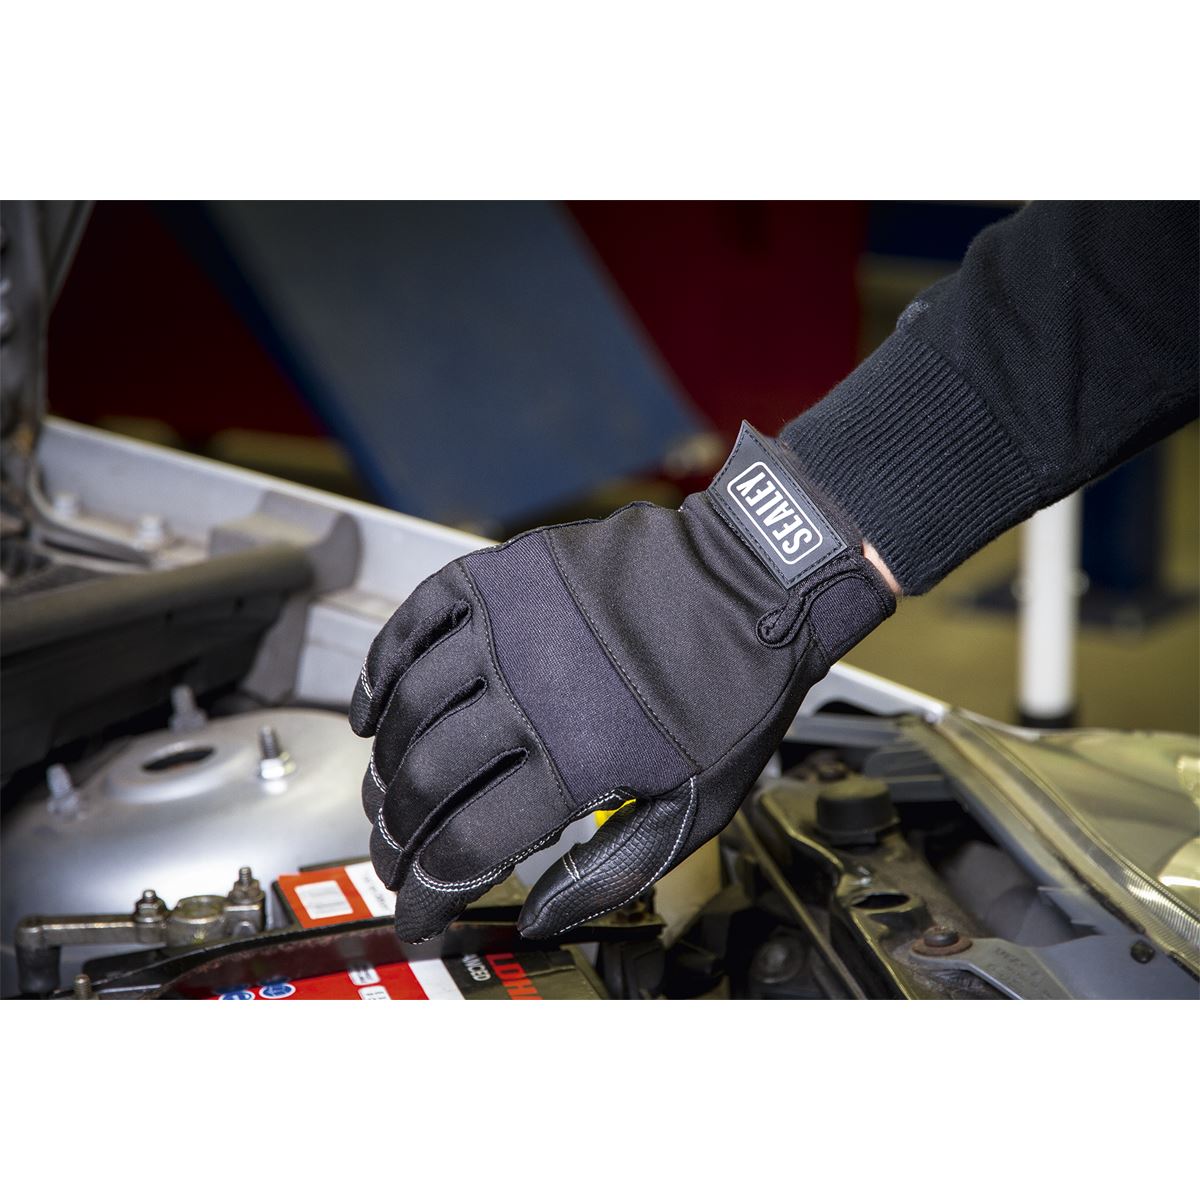 Sealey Mechanic's Gloves Light Palm Tactouch - Large